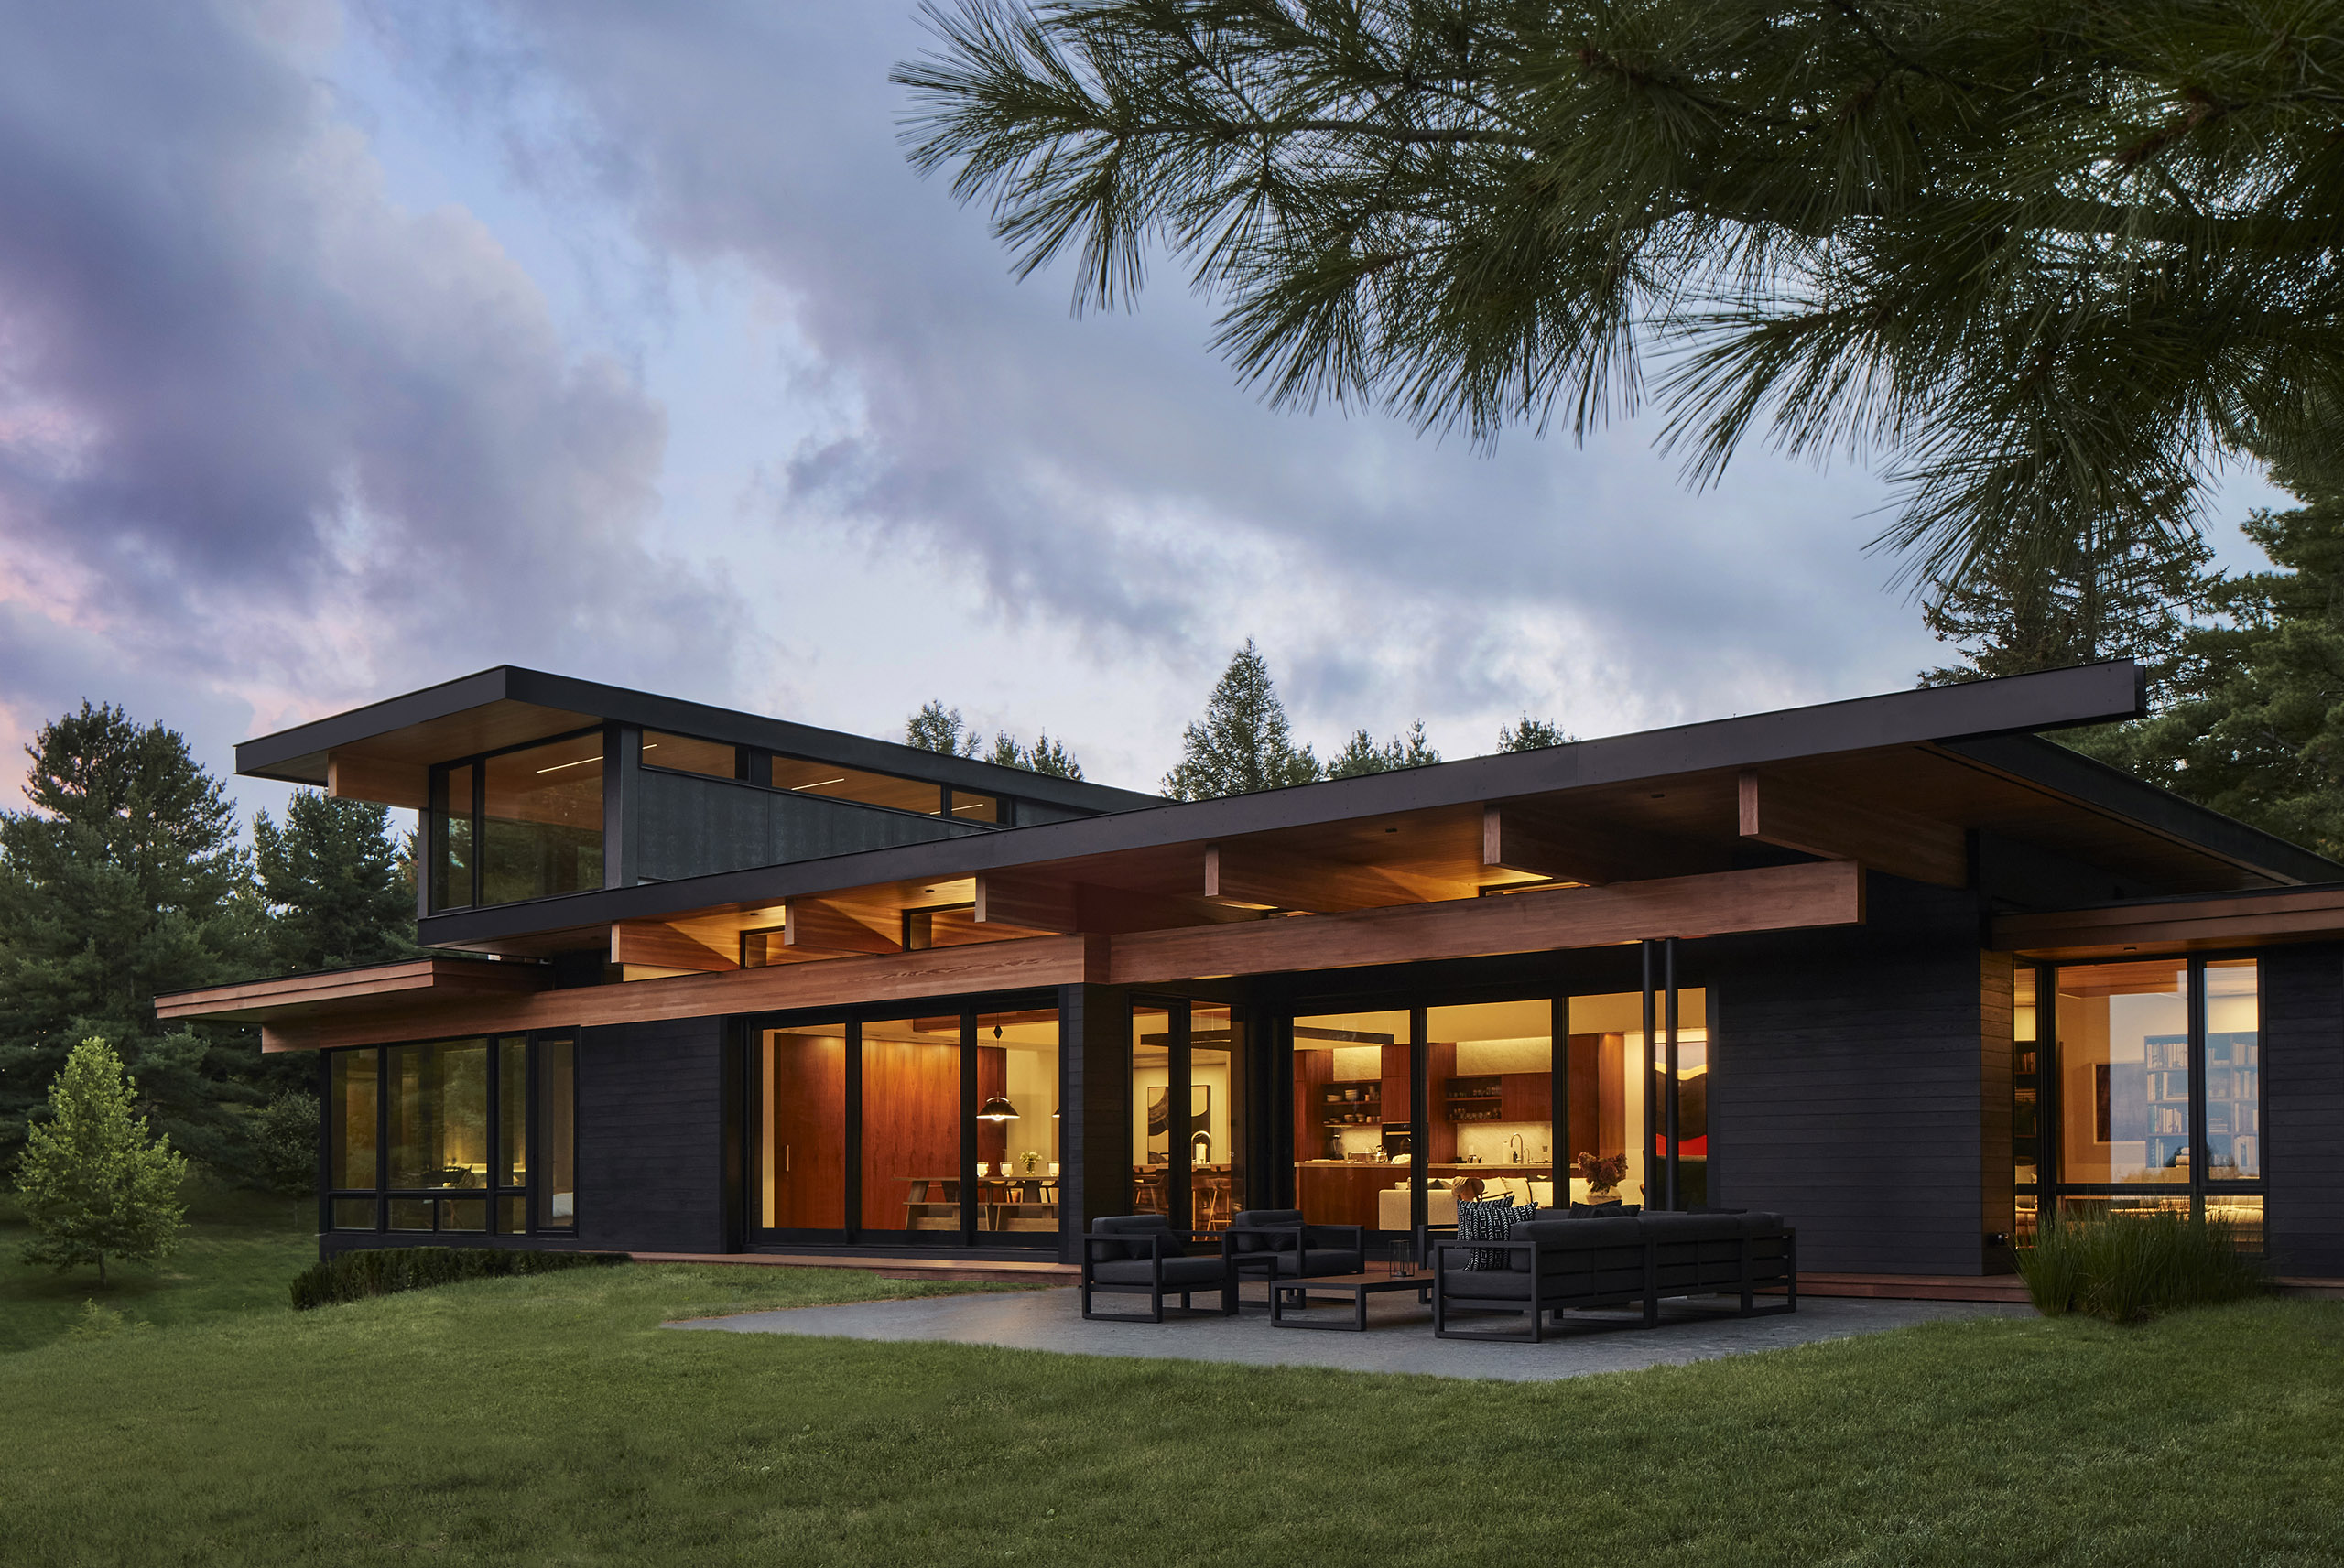 Exterior rear view of a rural modern home in Canada